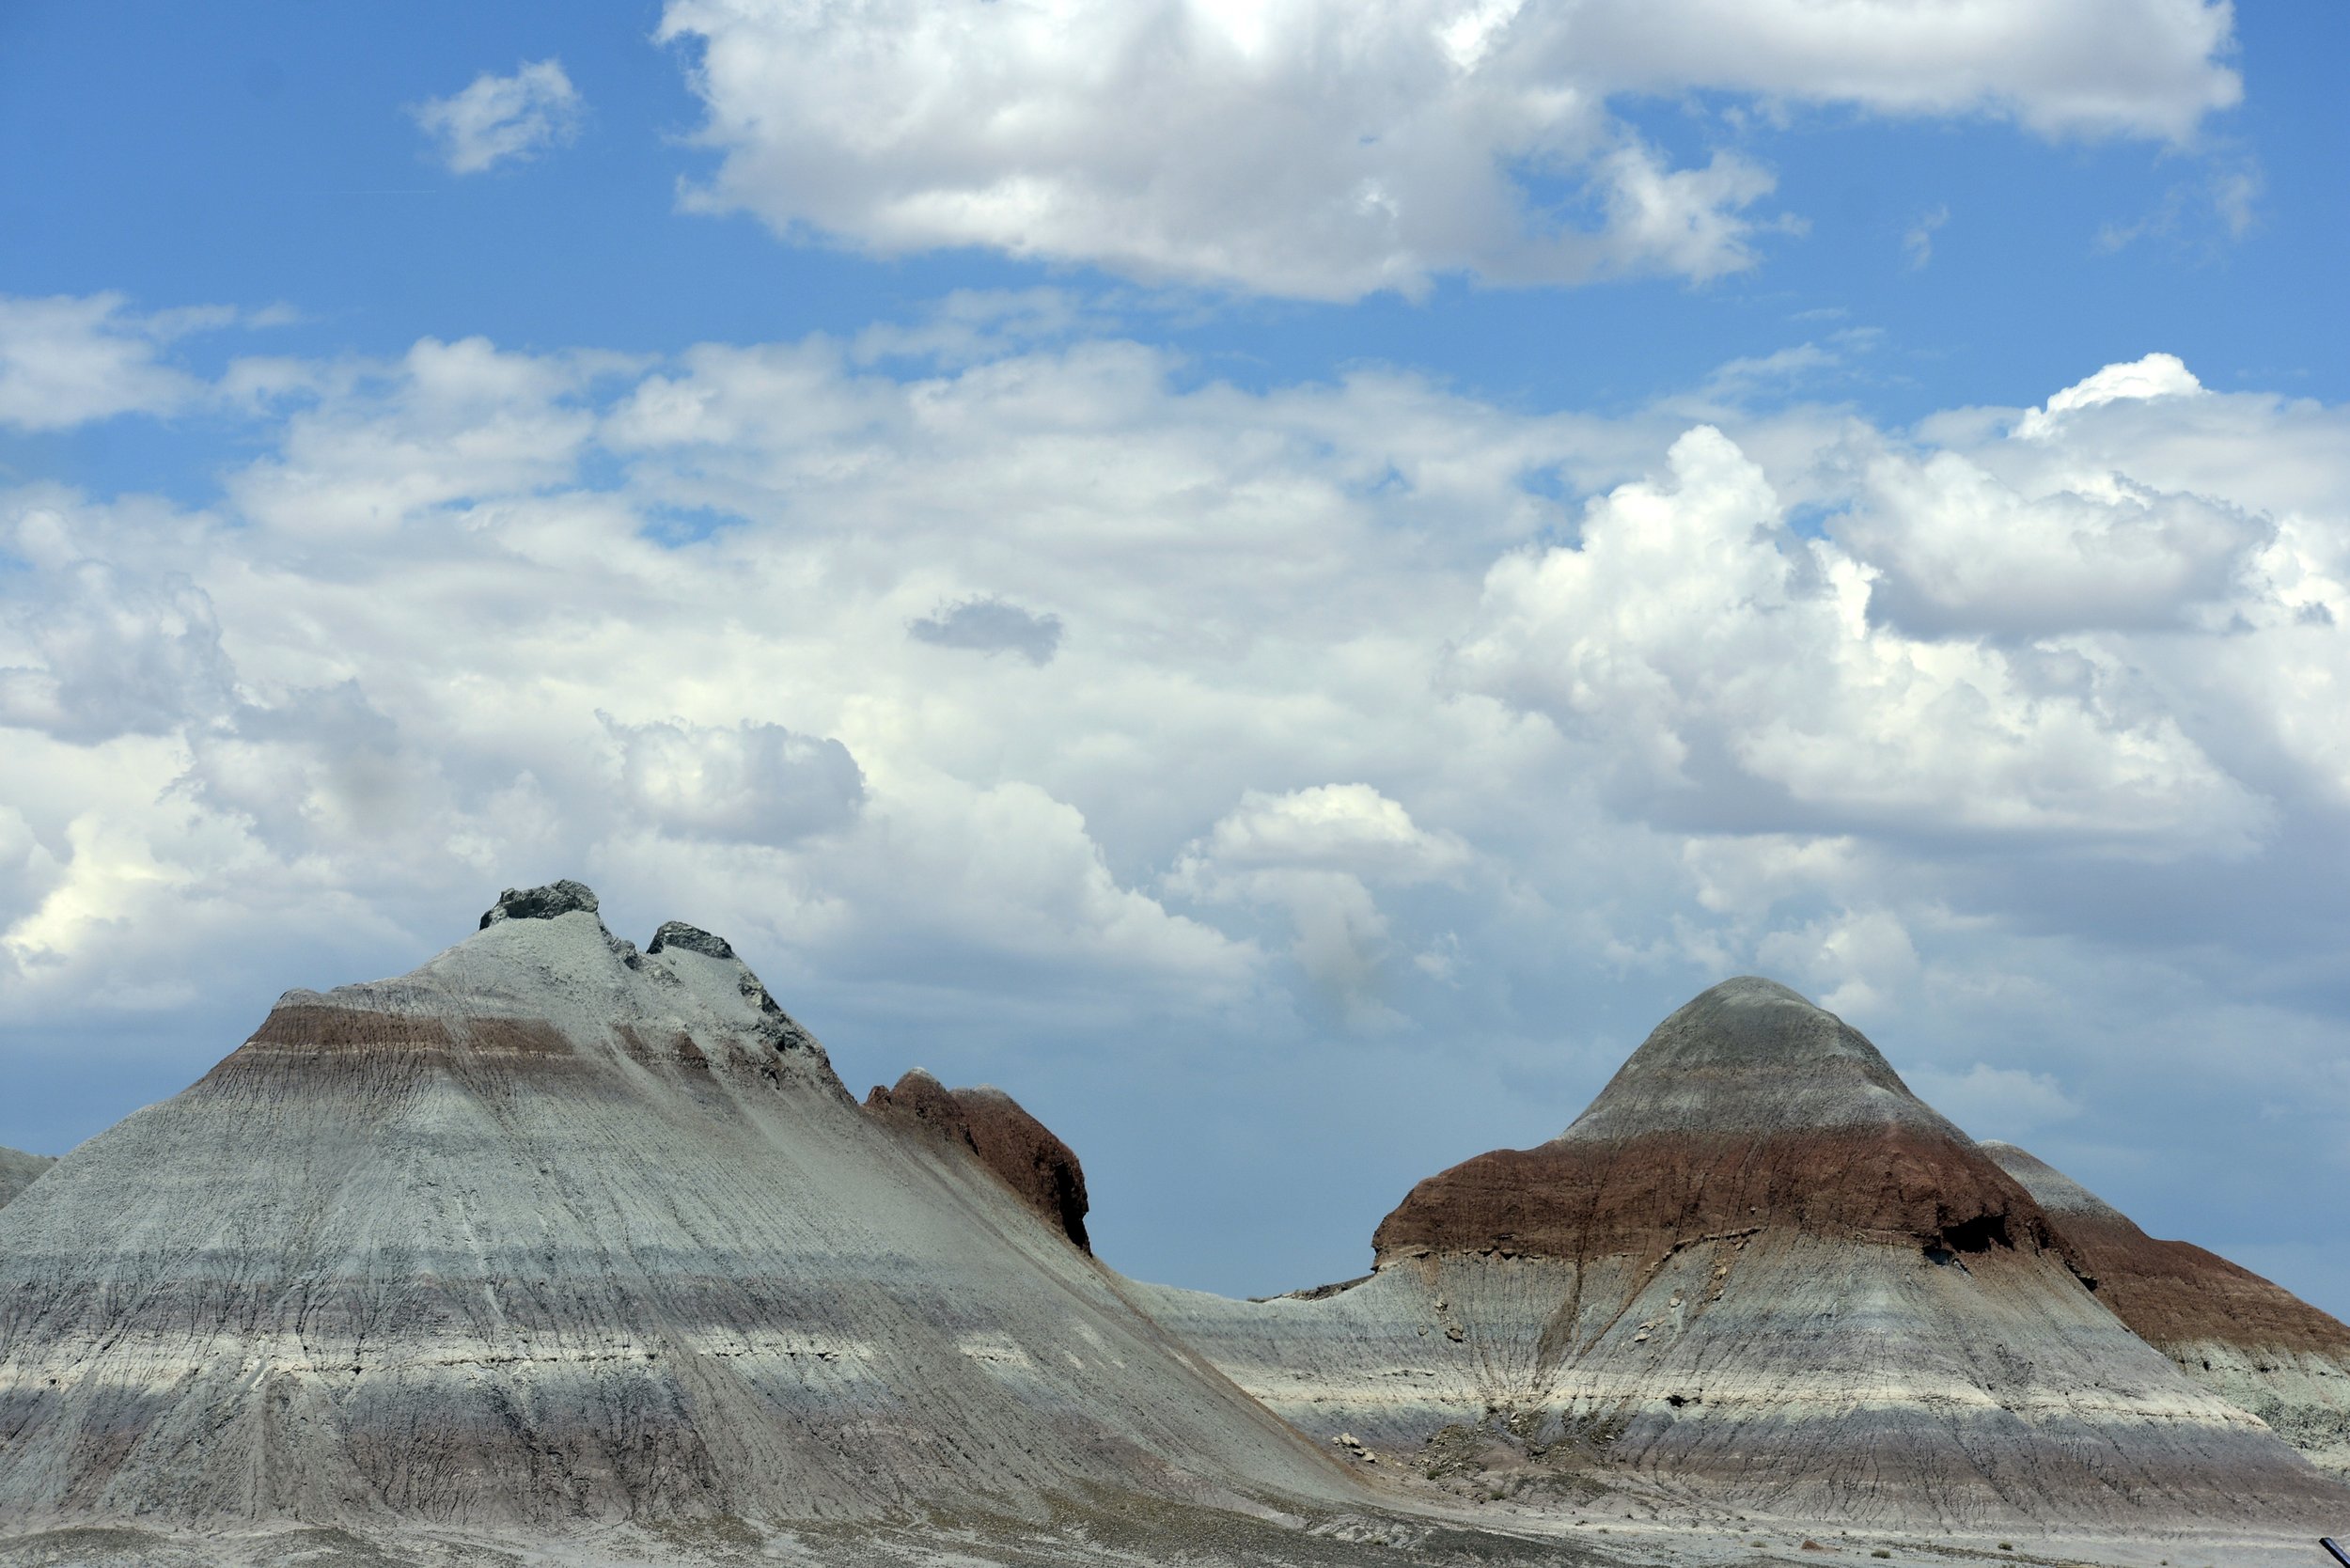 Arizona Painted Desert Photography by Carrie Crocker